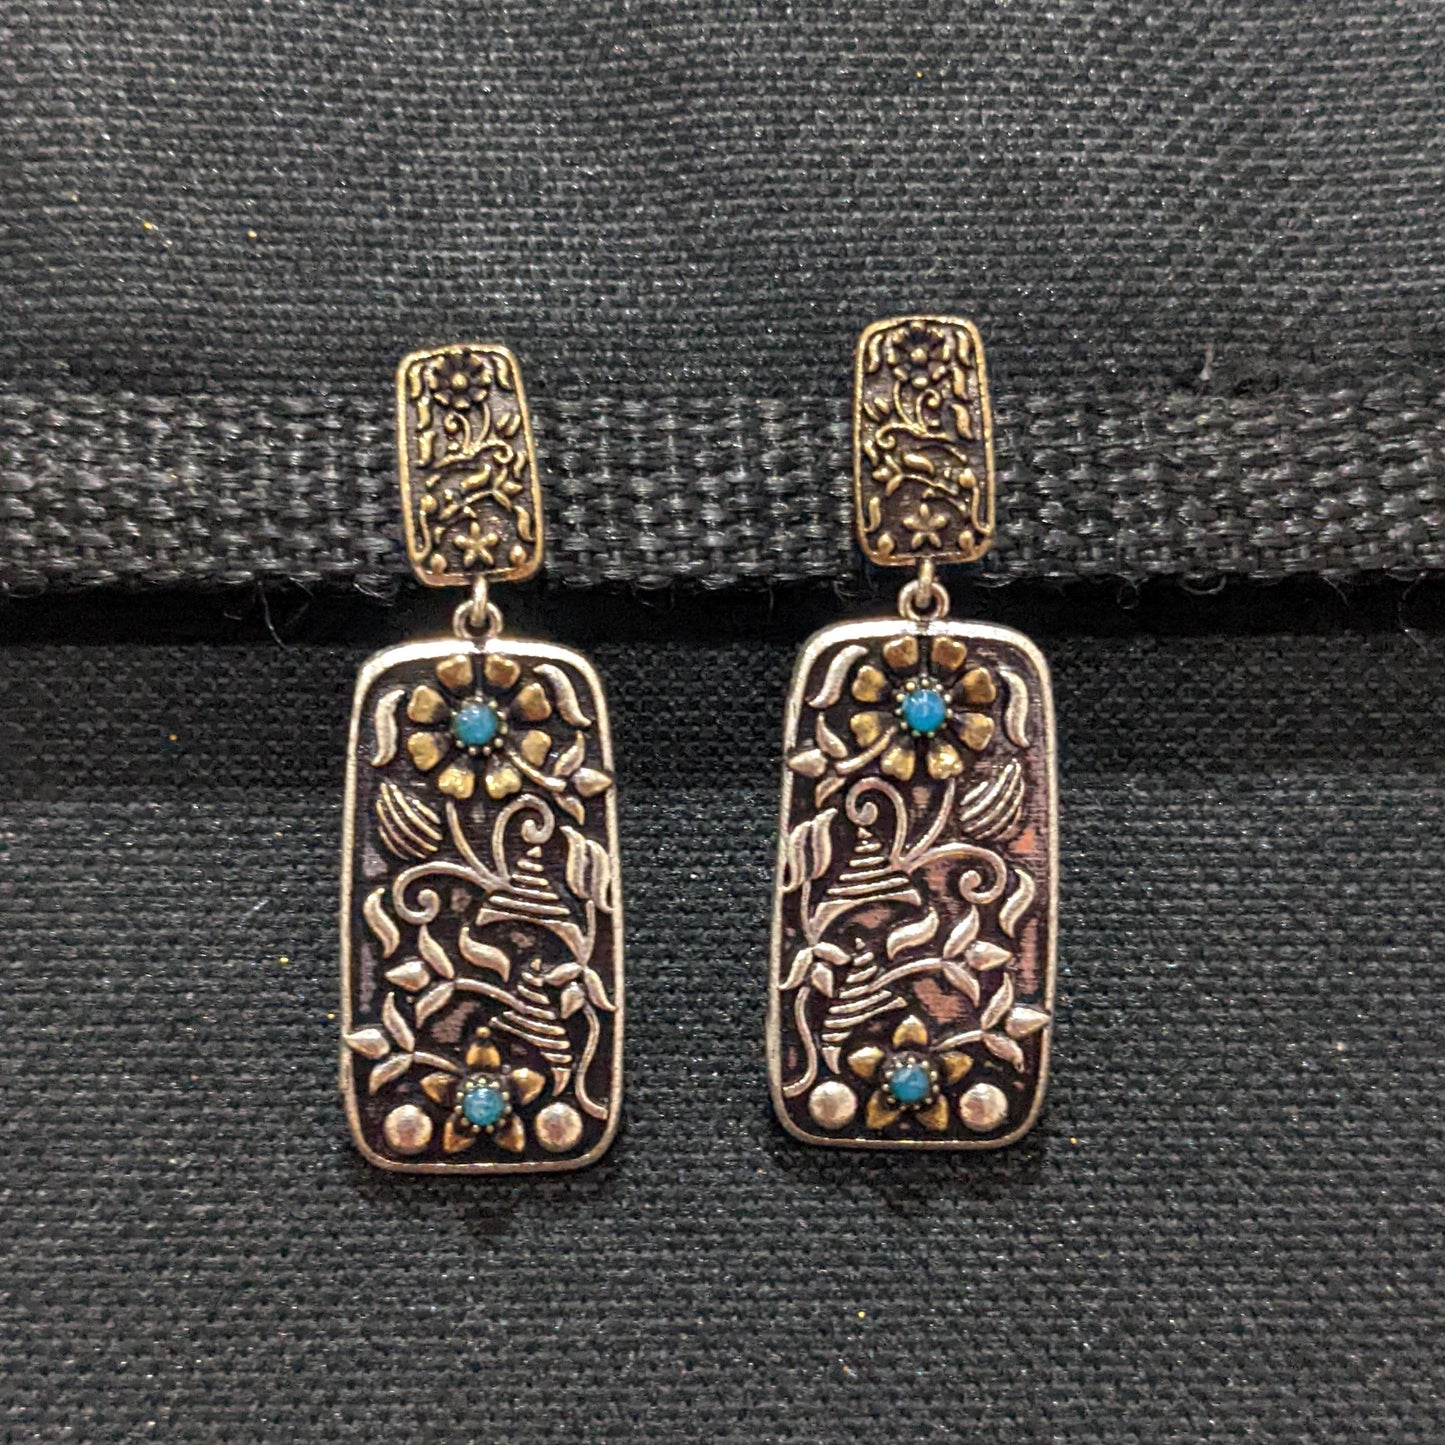 Oxidized Dual Tone Earring - Different designs available